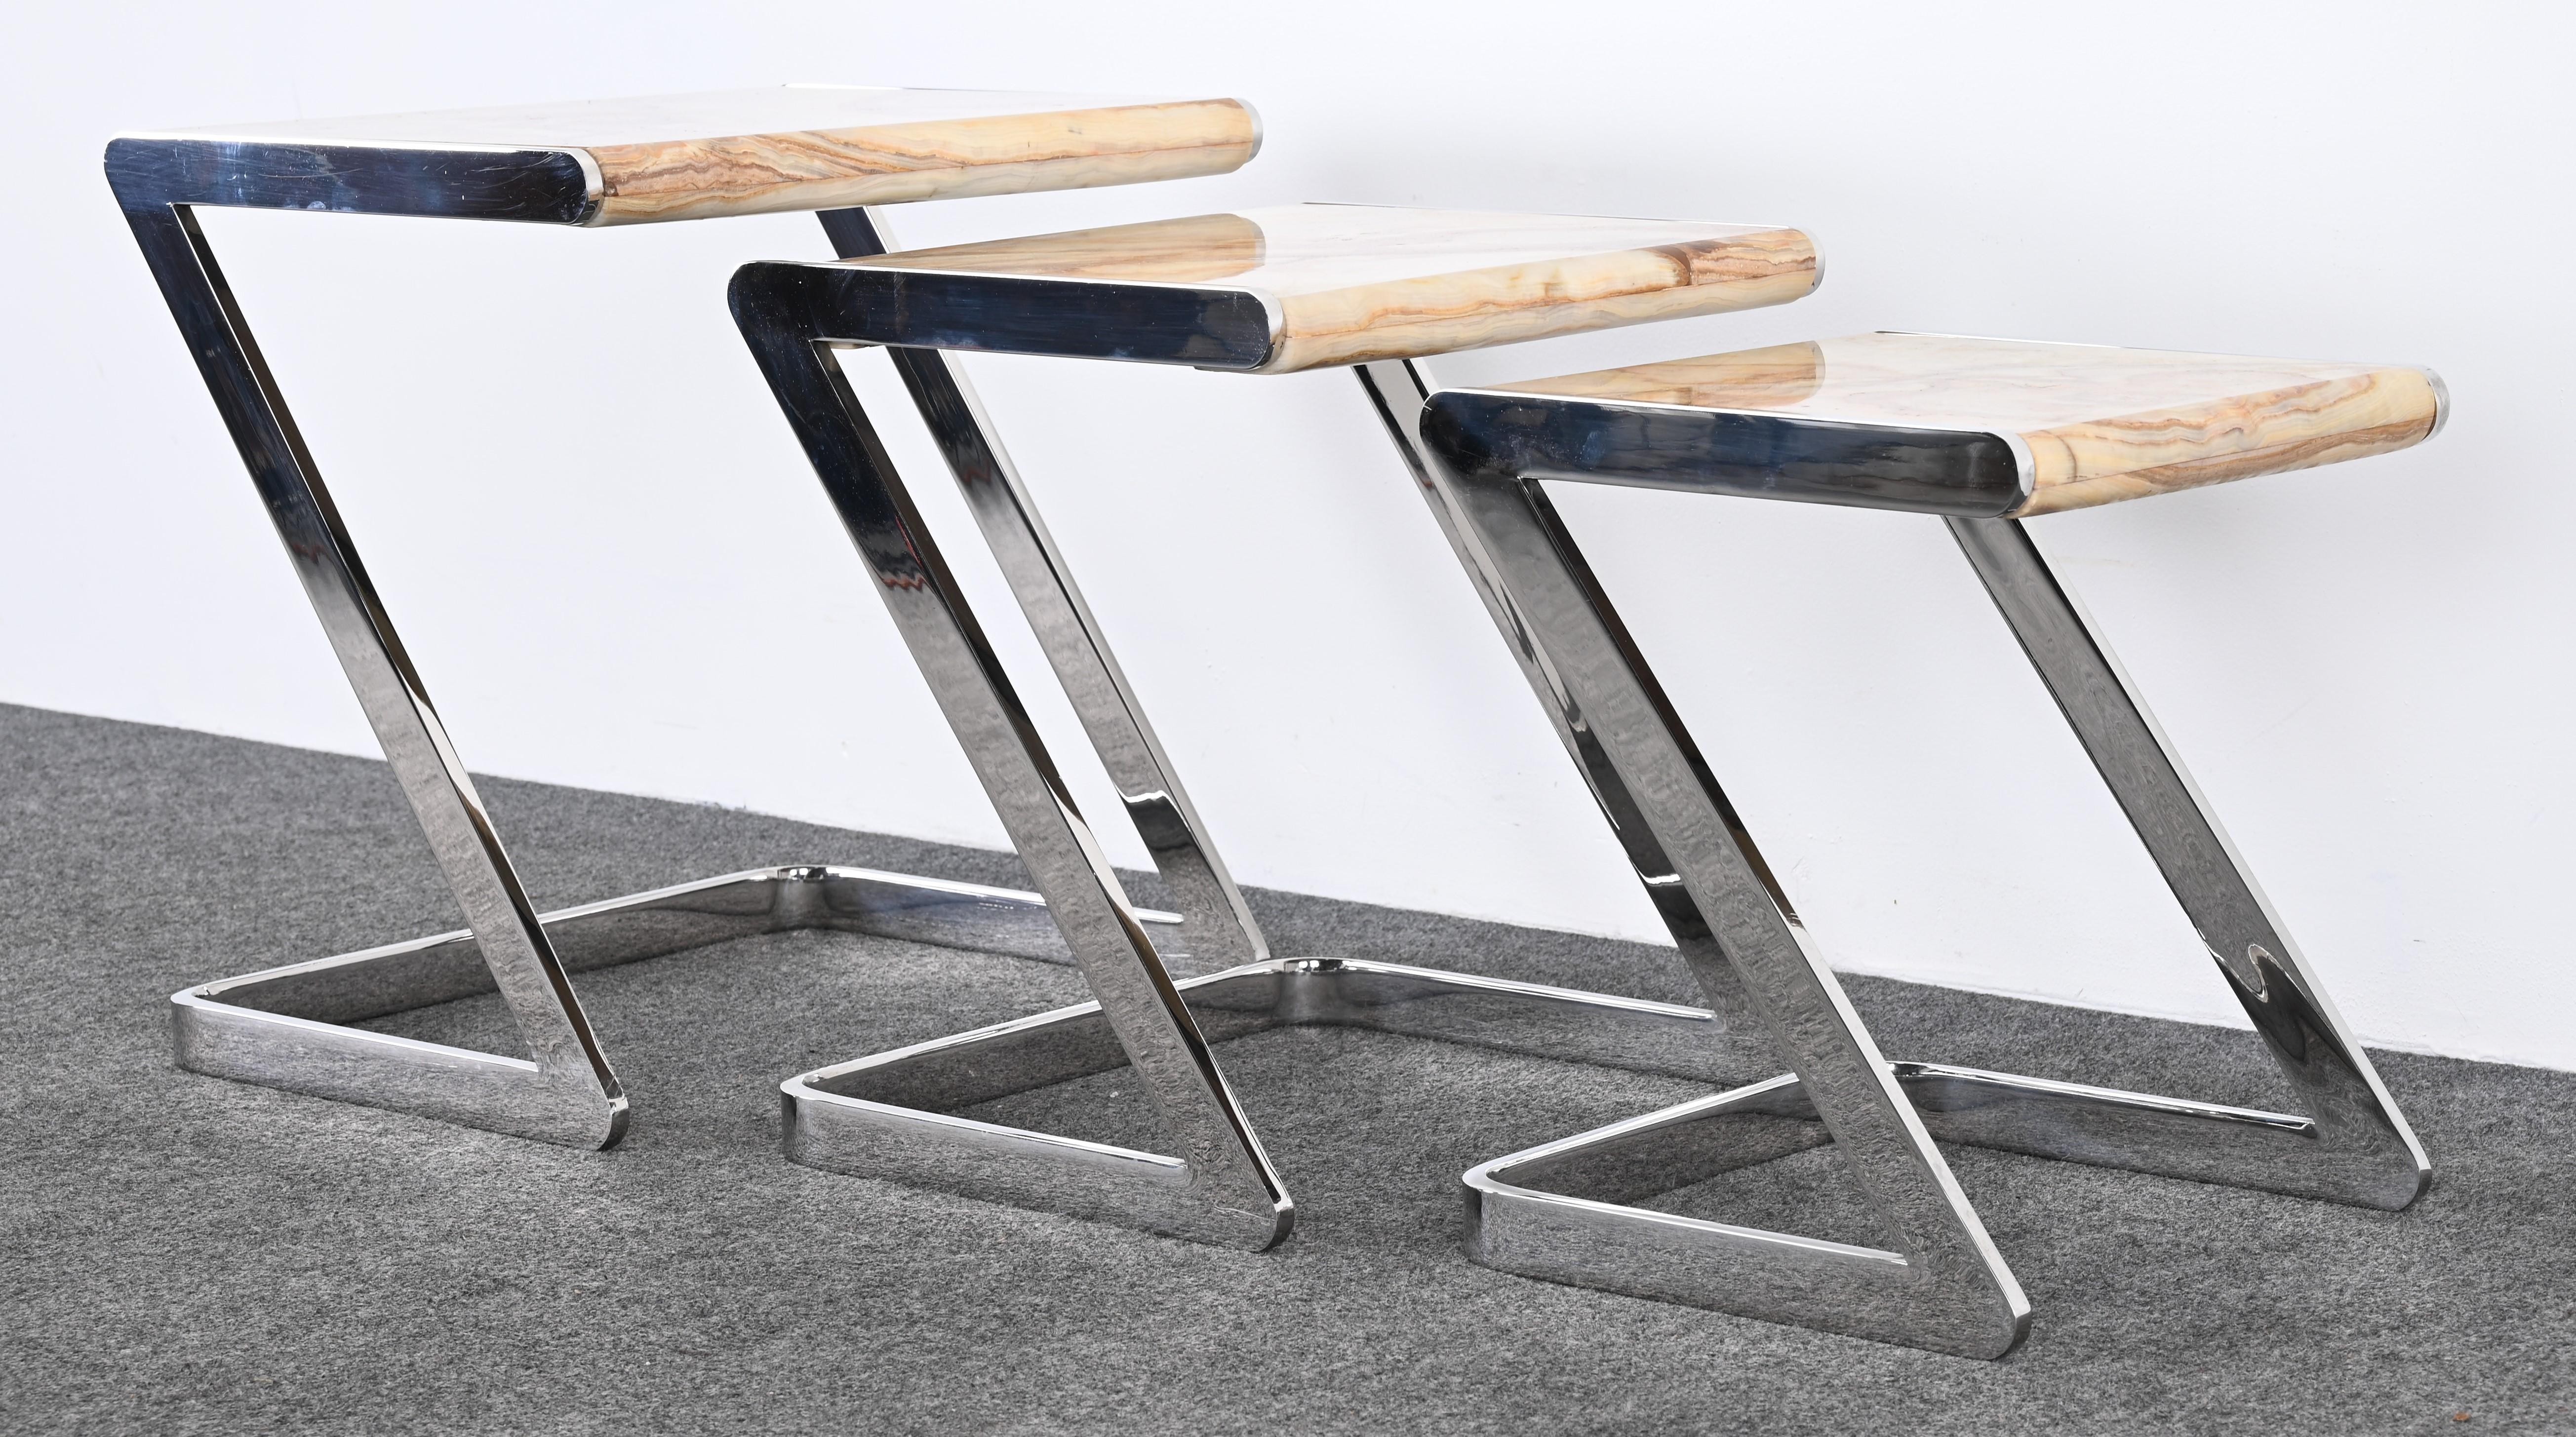 Onyx and Stainless Steel Nesting Tables by Brueton, 1980s For Sale 1